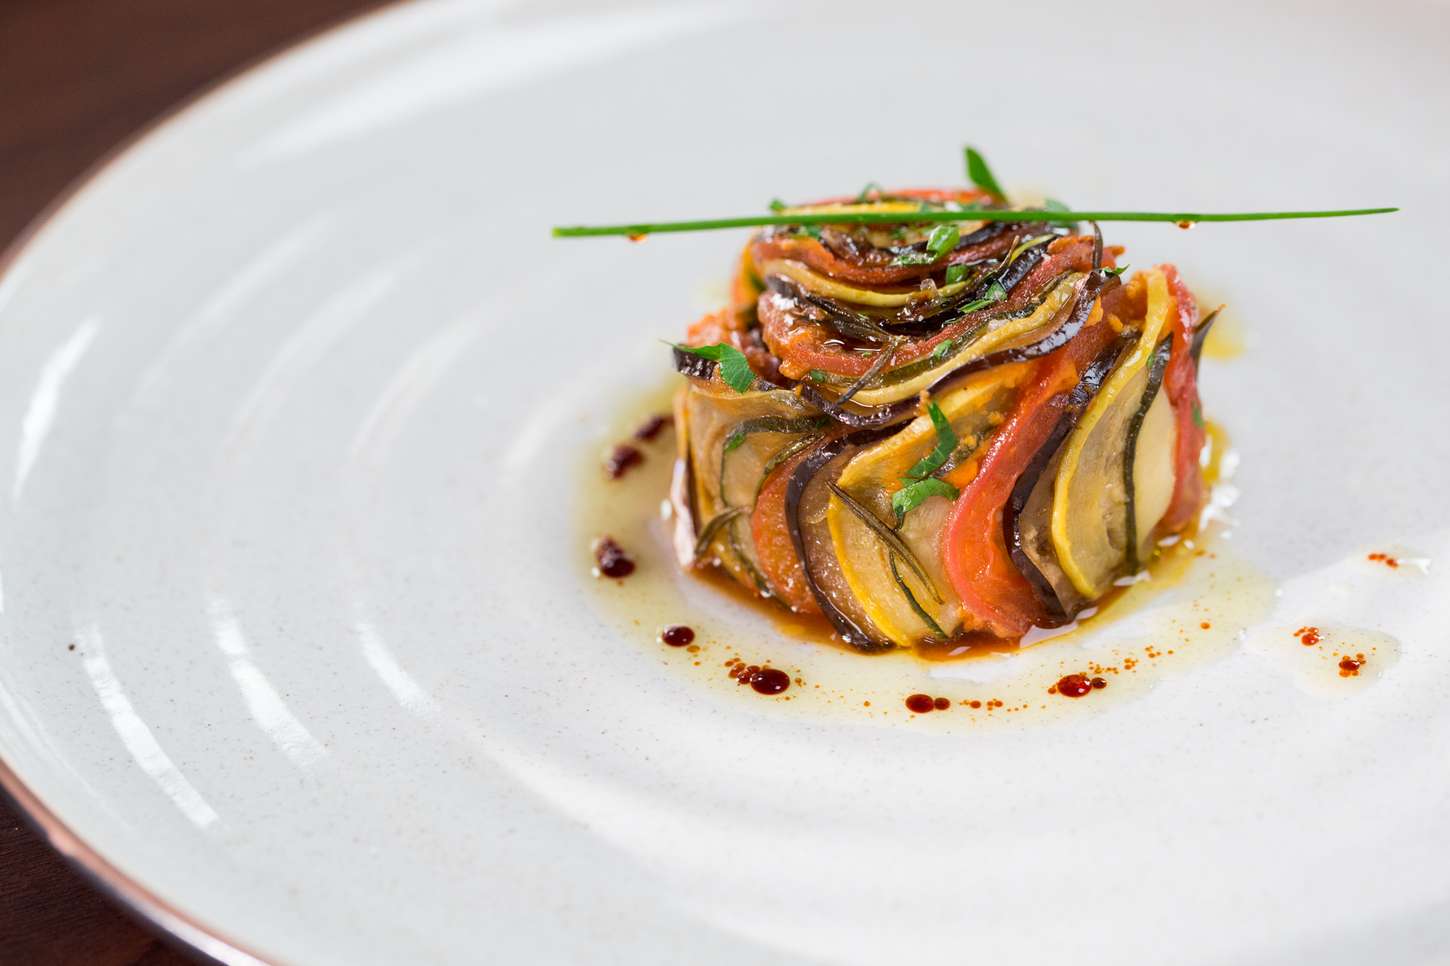 Get Creative With Pixar-Style Ratatouille | Recipe | ChefSteps